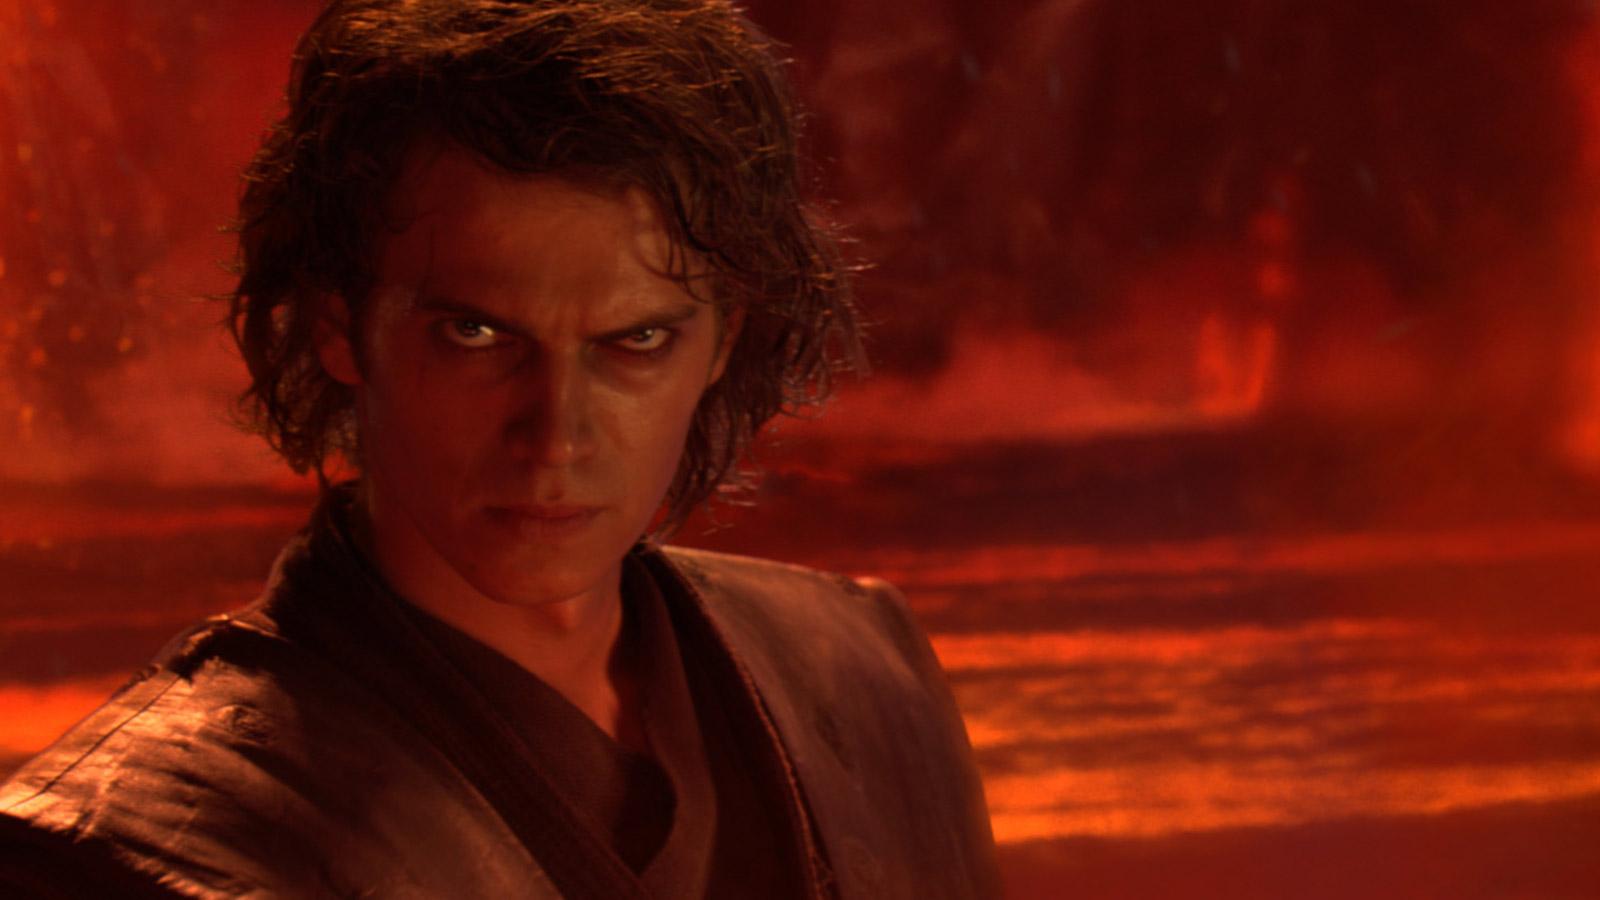 Star Wars Ep. III: Revenge of the Sith download the new version for android